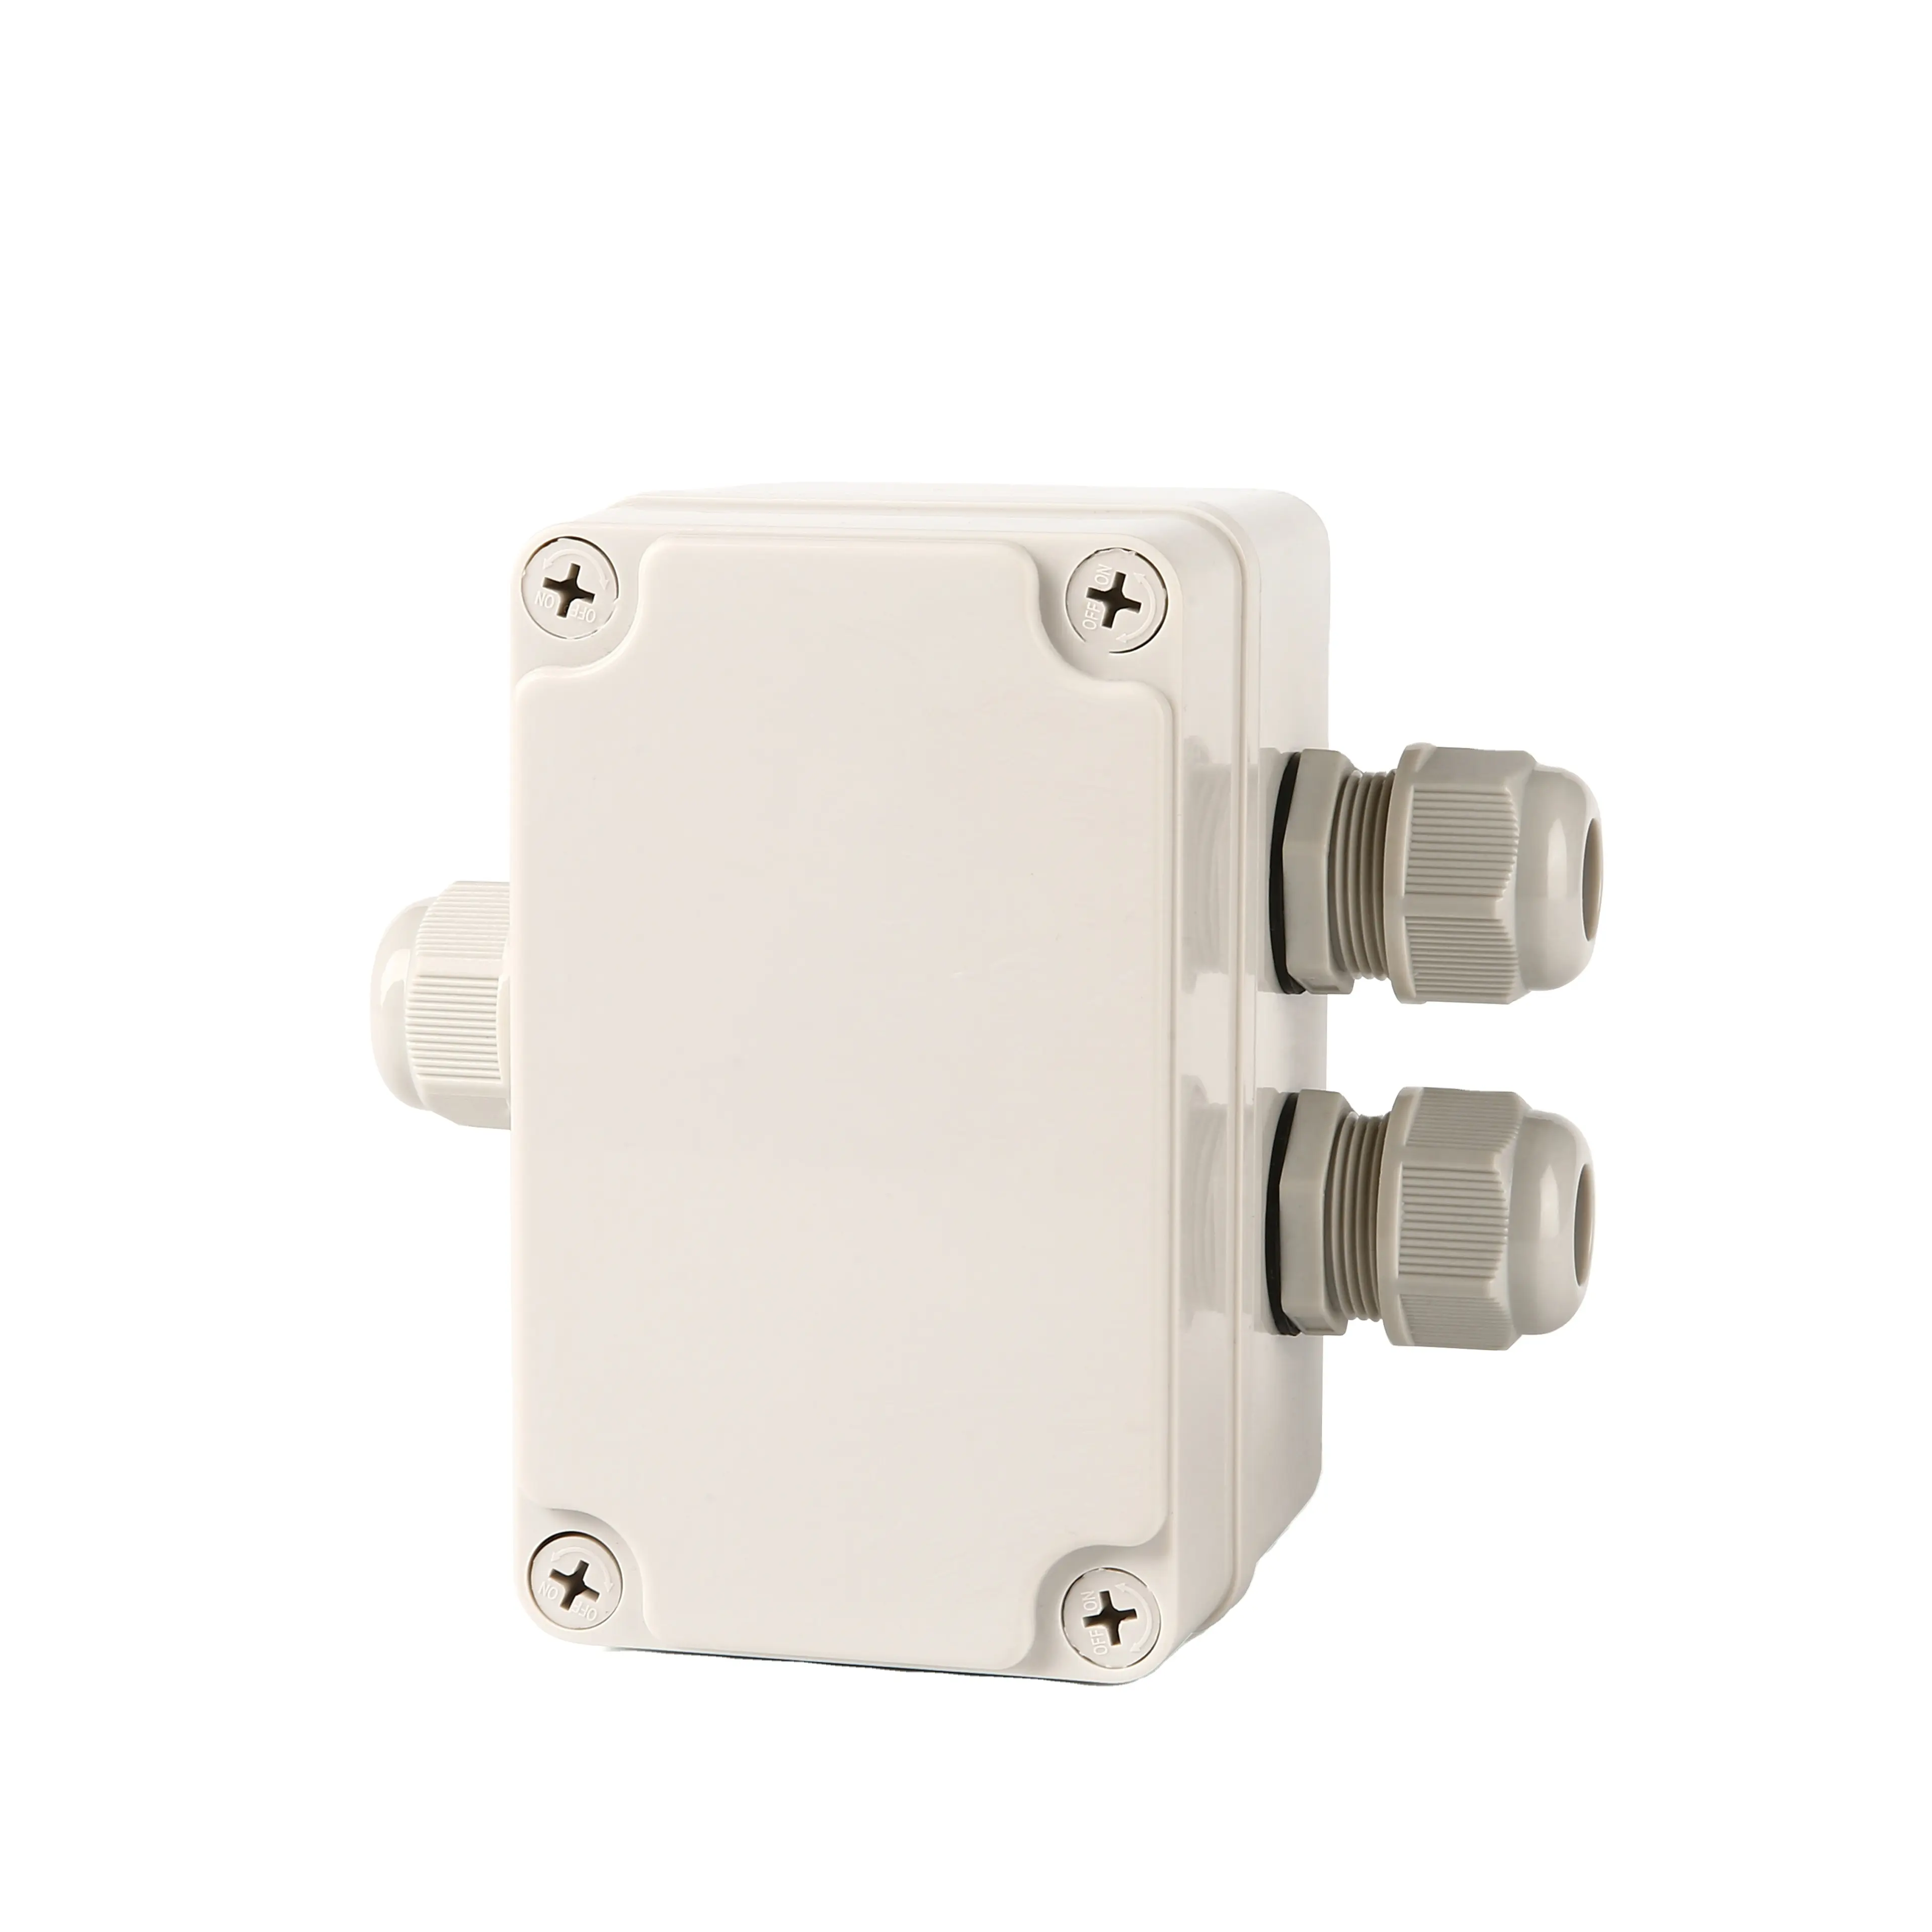 China PVC ABS Ip65 Plastic Explosion Proof Waterproof Cable Gland Electrical Enclosure Junction Box White Body Customized PH-10P